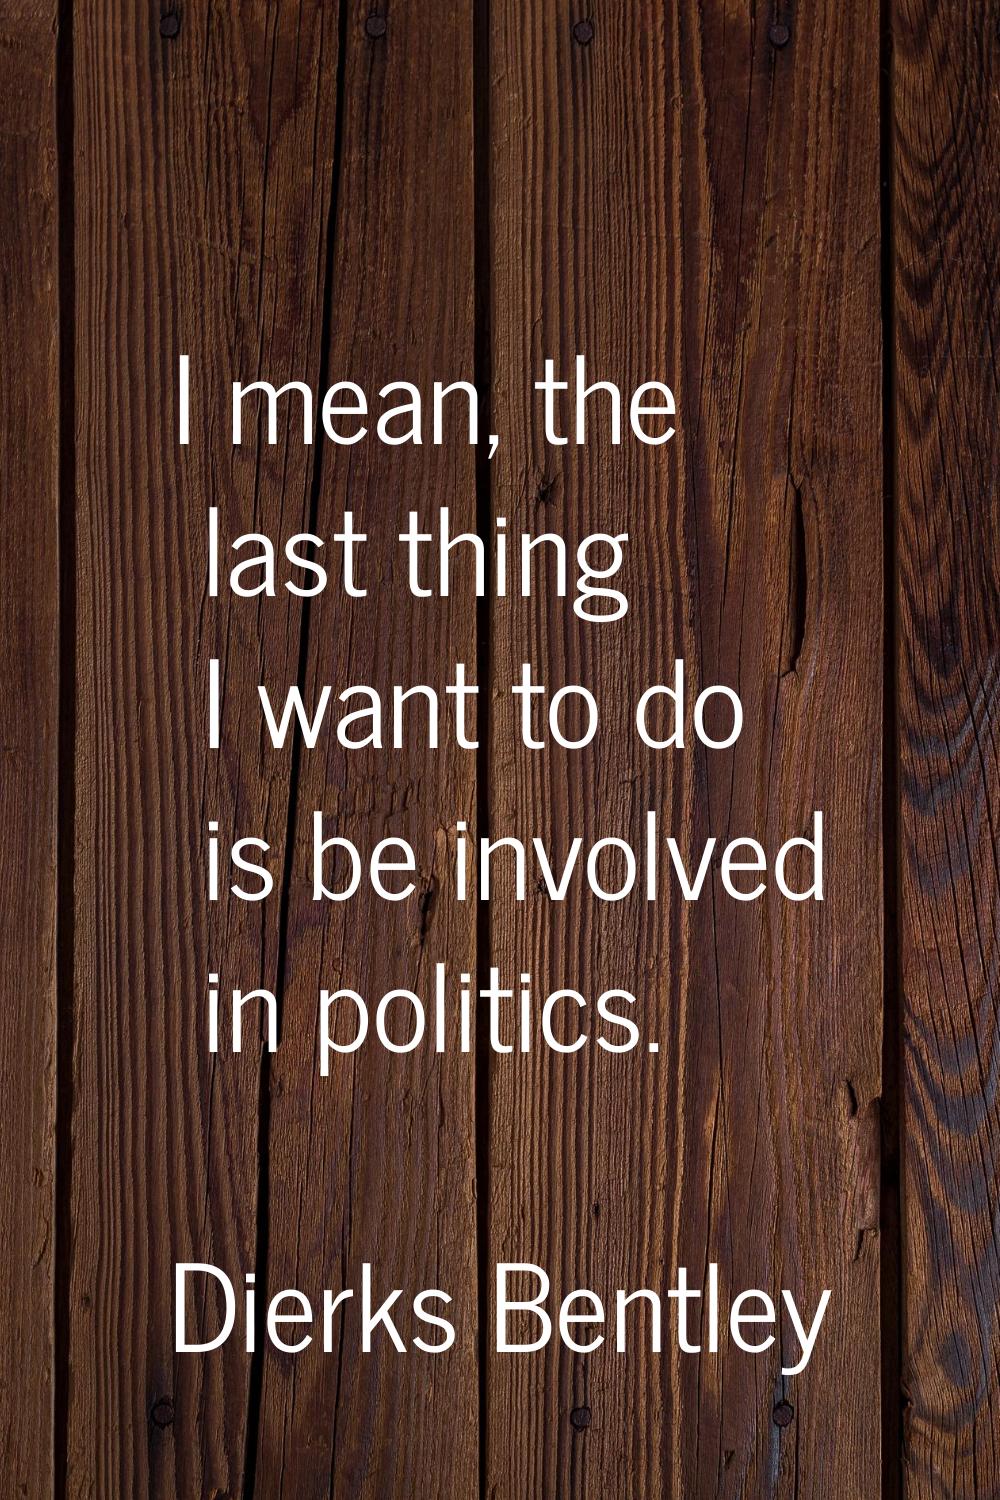 I mean, the last thing I want to do is be involved in politics.